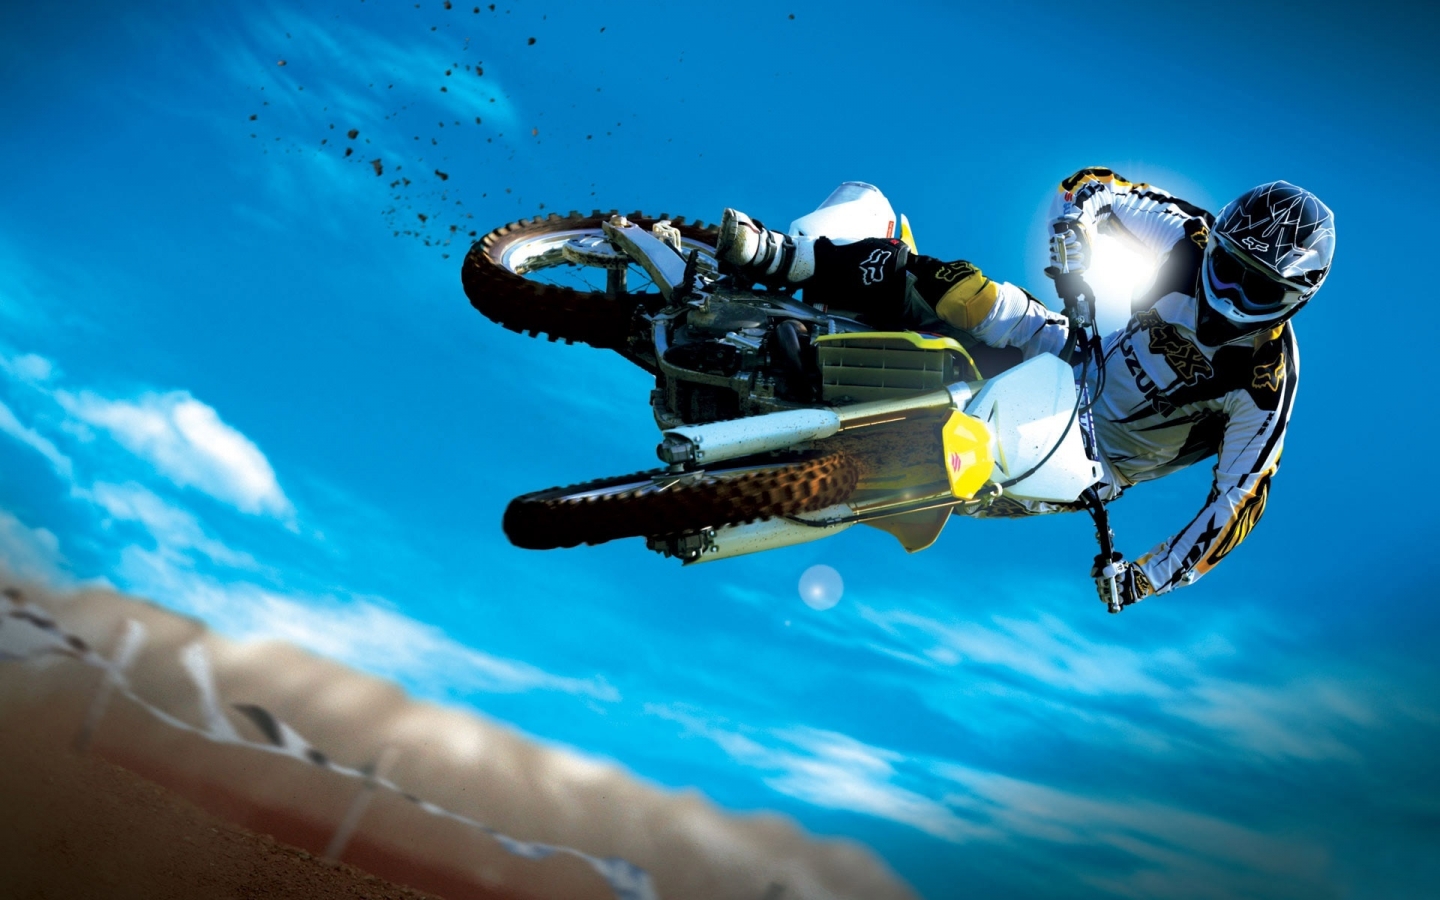 Moto Extreme Sport for 1440 x 900 widescreen resolution